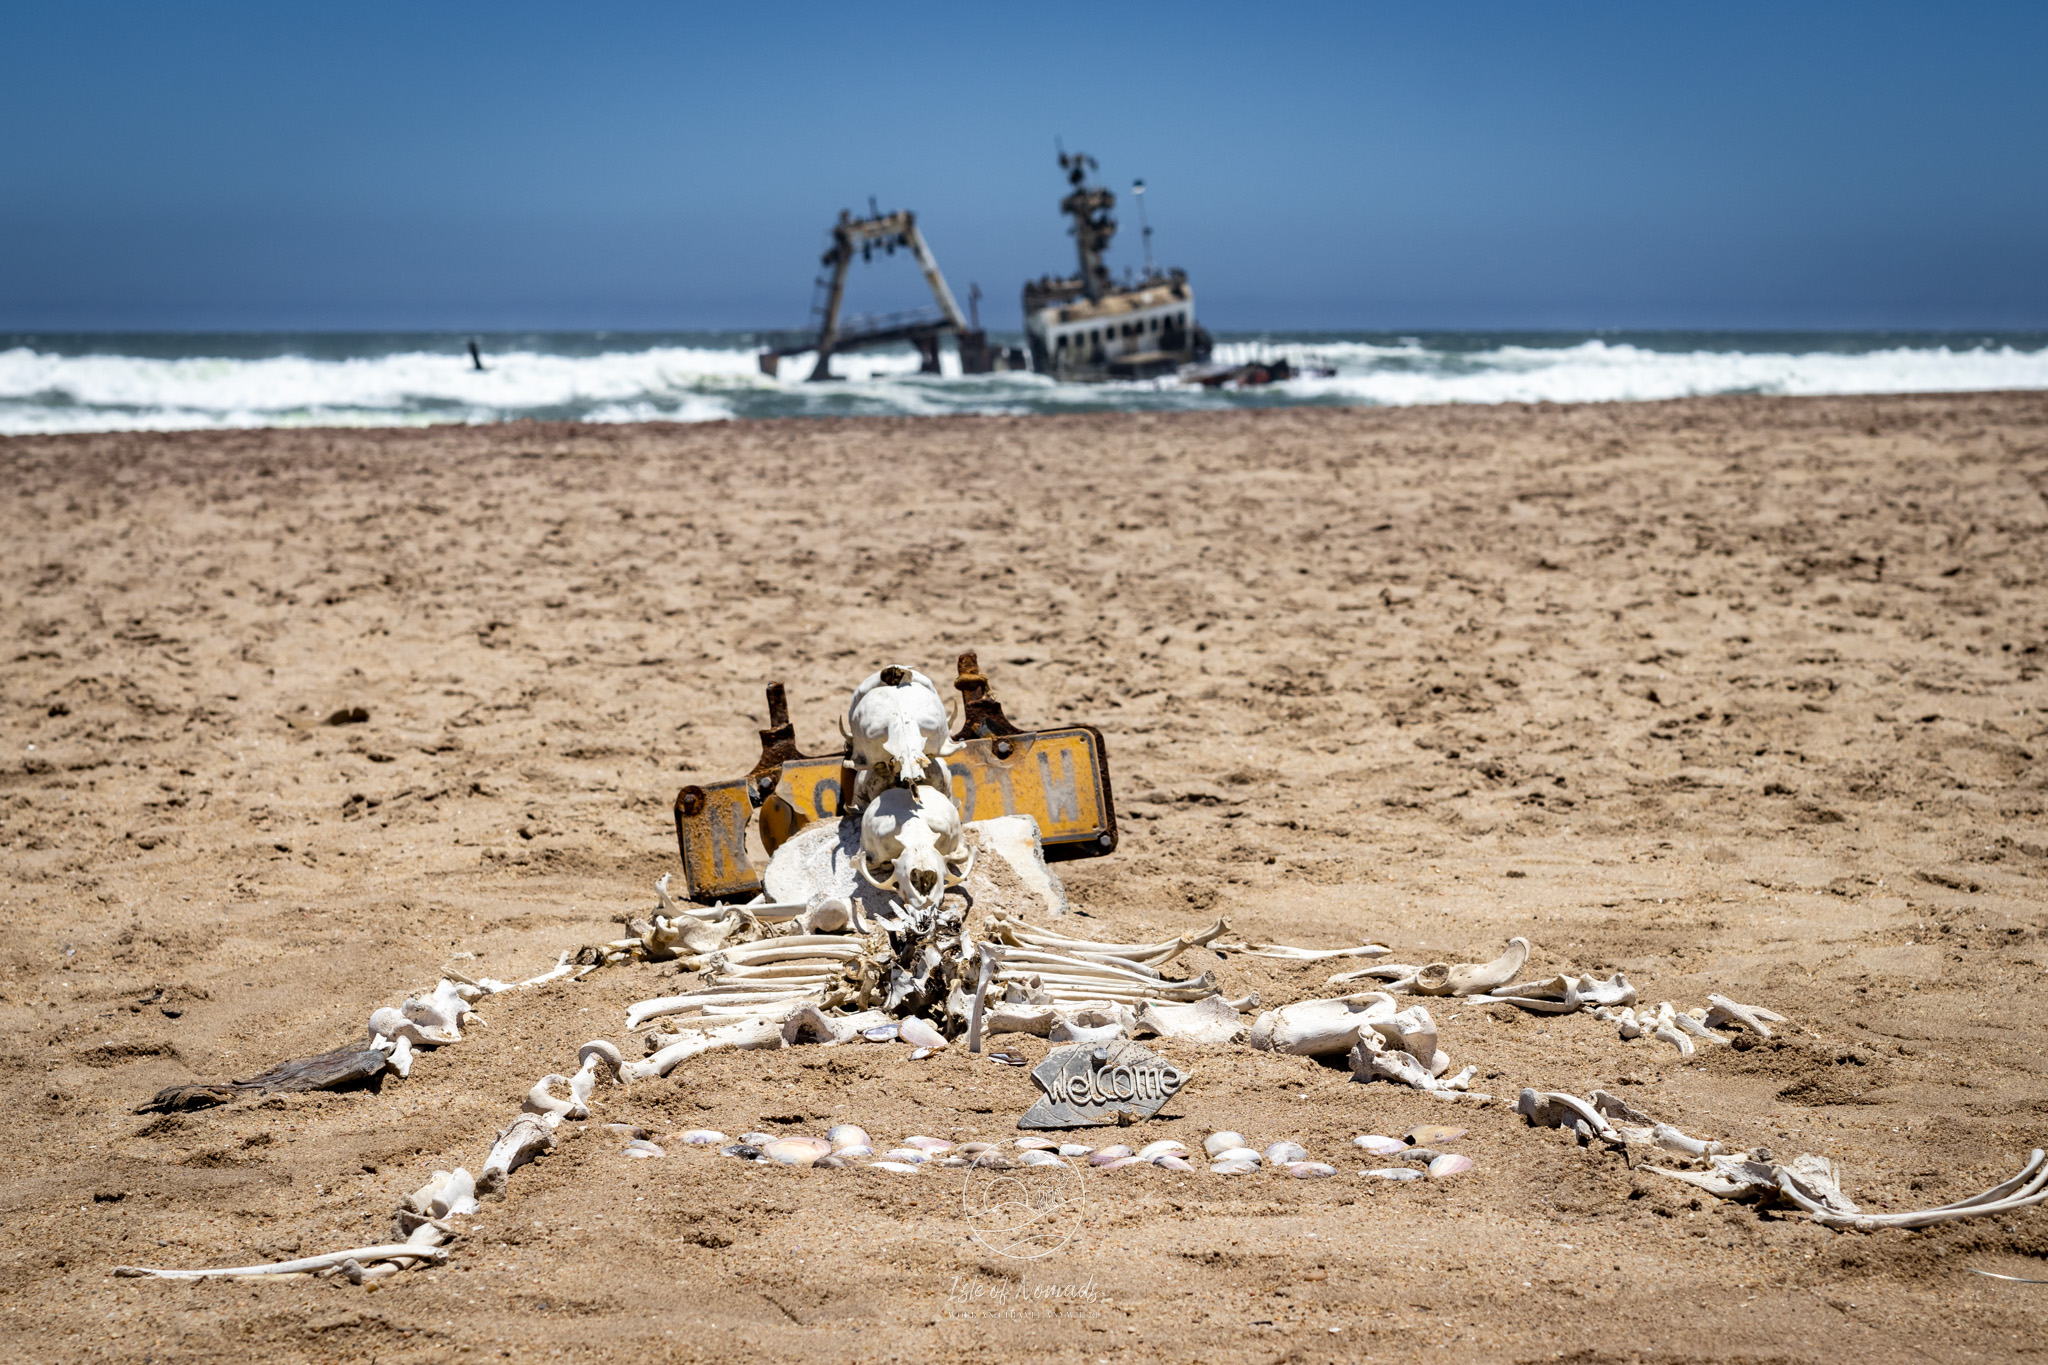 There is a reason the Northern coast of Namibia is called Skeleton coast